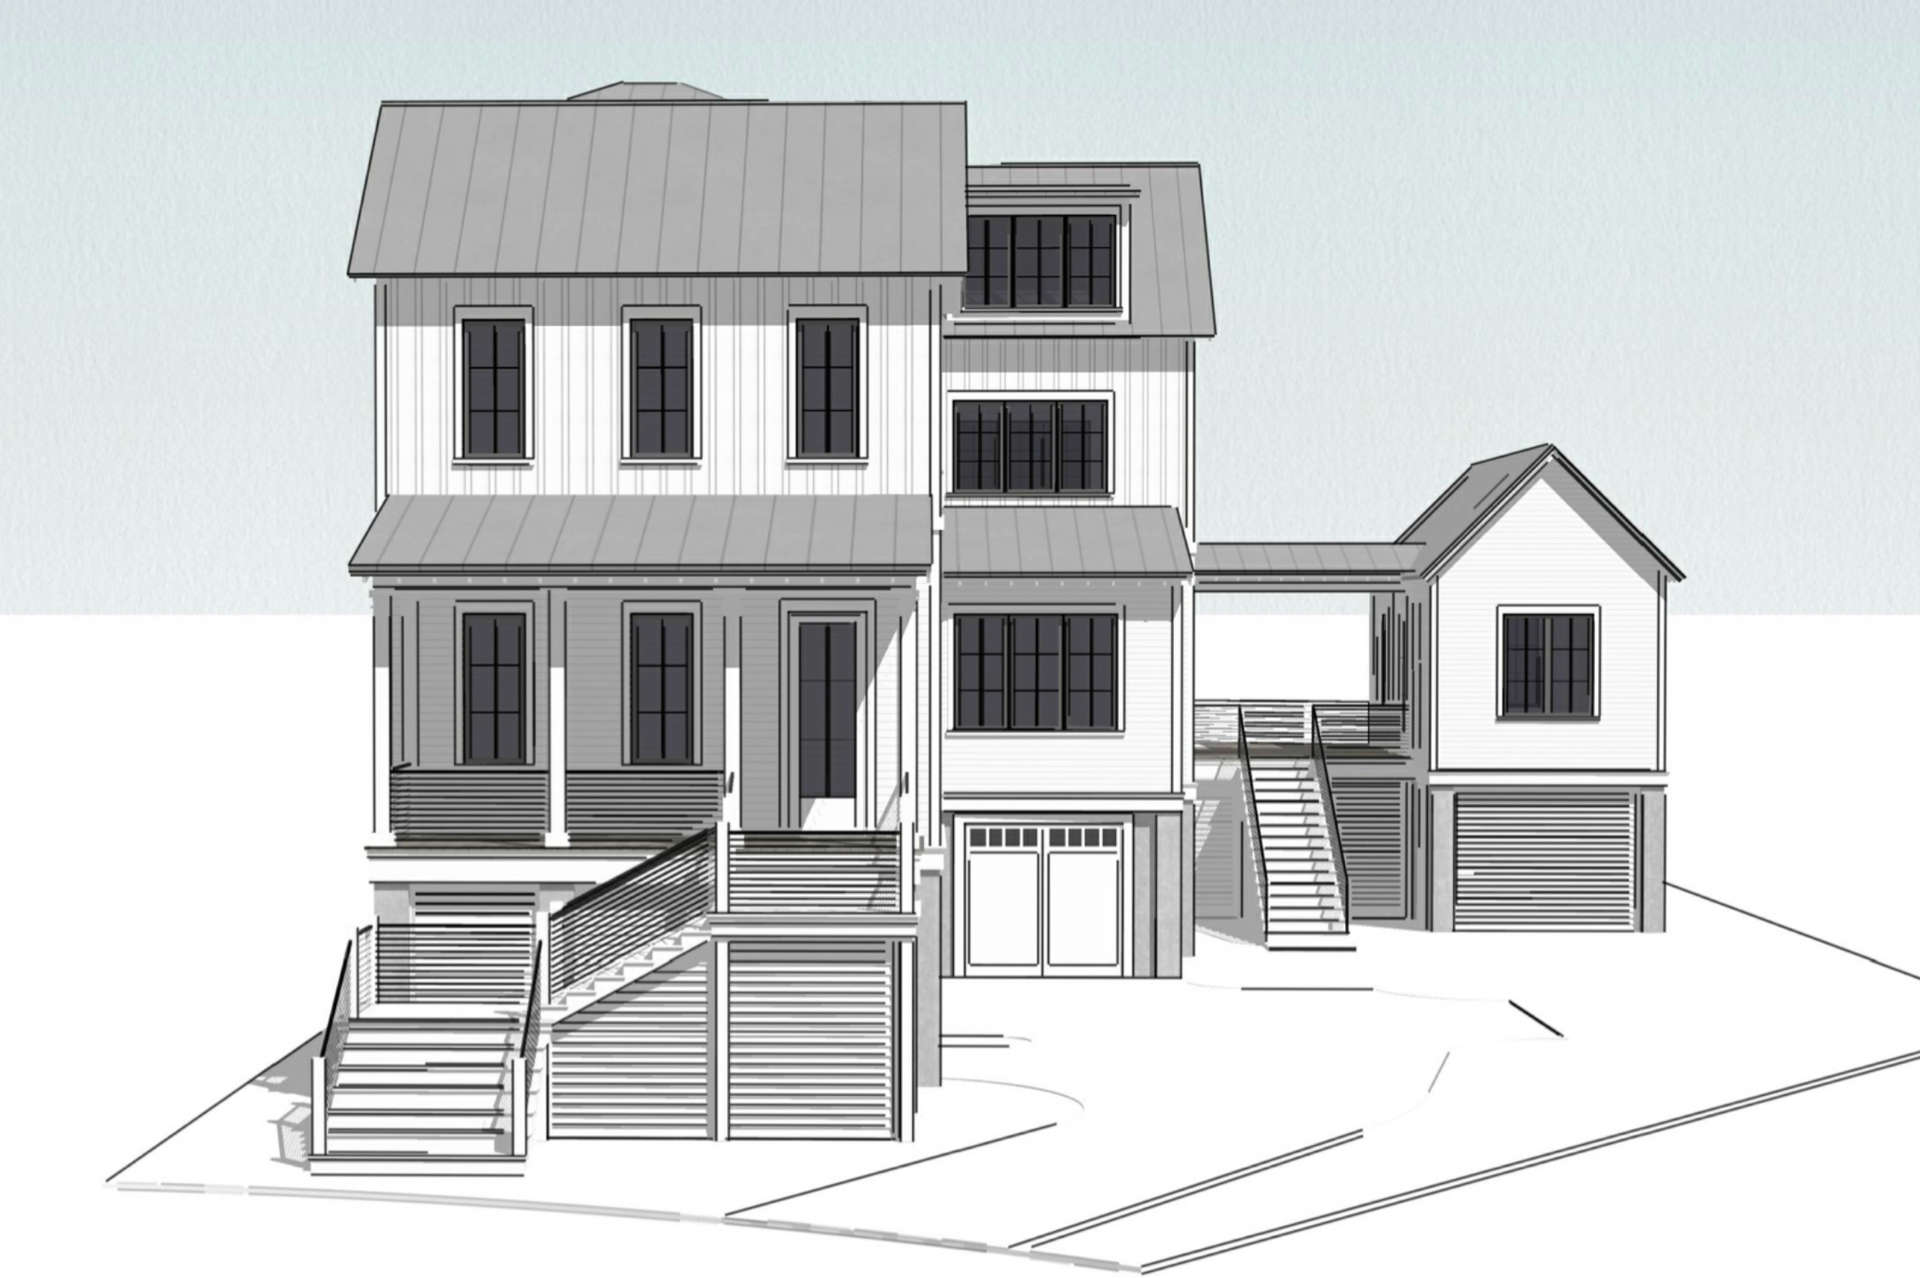 20 of 36. Home renderings are to act as aid in lot visualization. Only lot for sale.